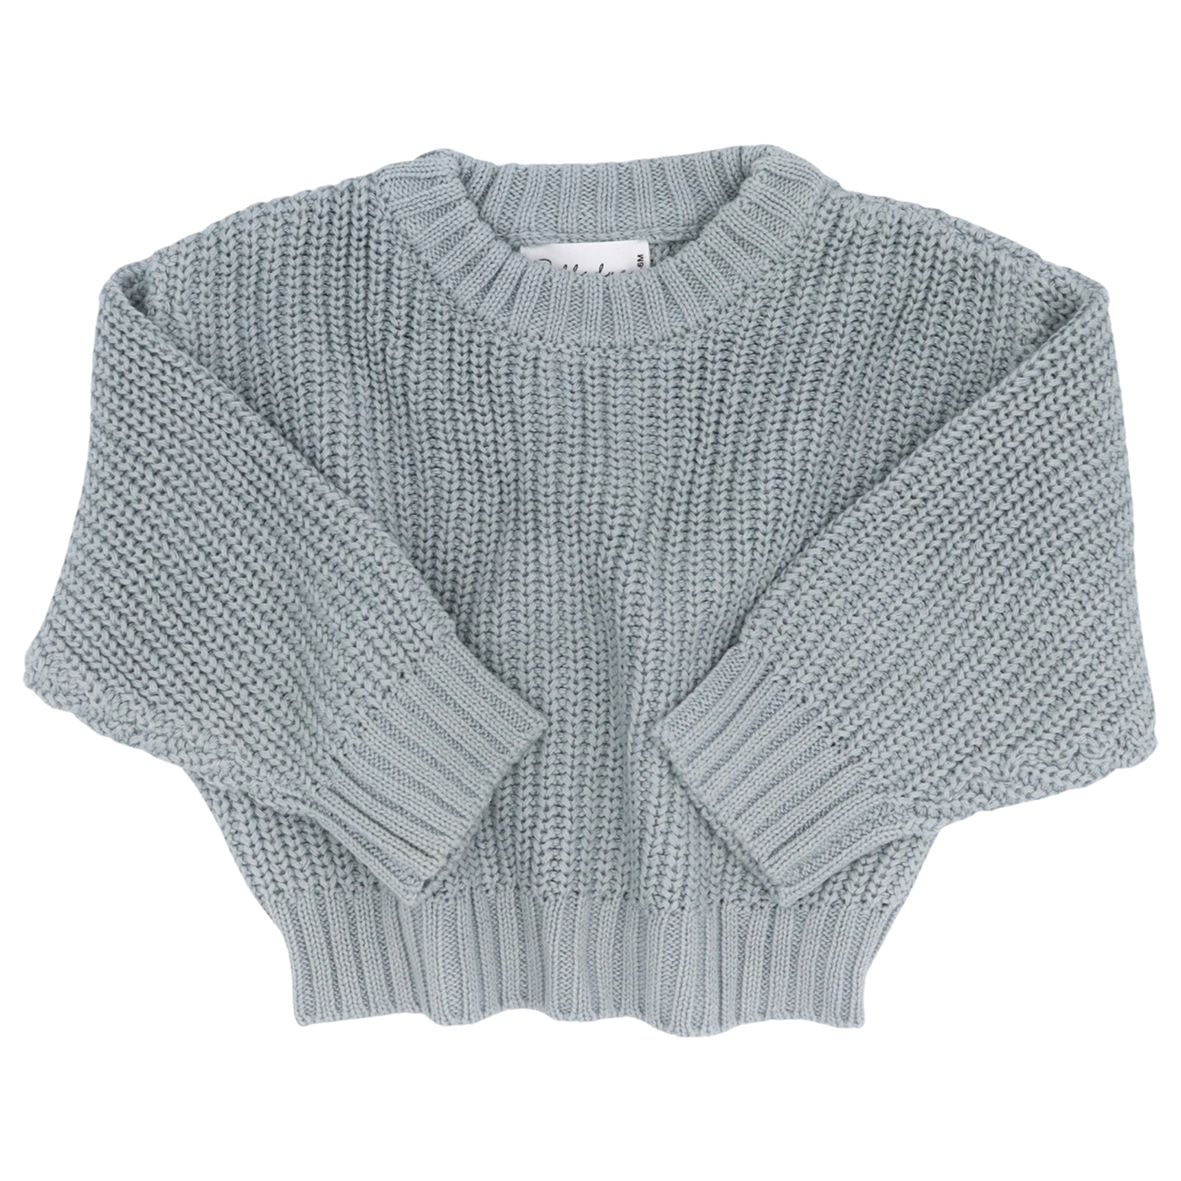 Bubbadue Knitted Baby Jersey (0-6 Months) - Bubbadue